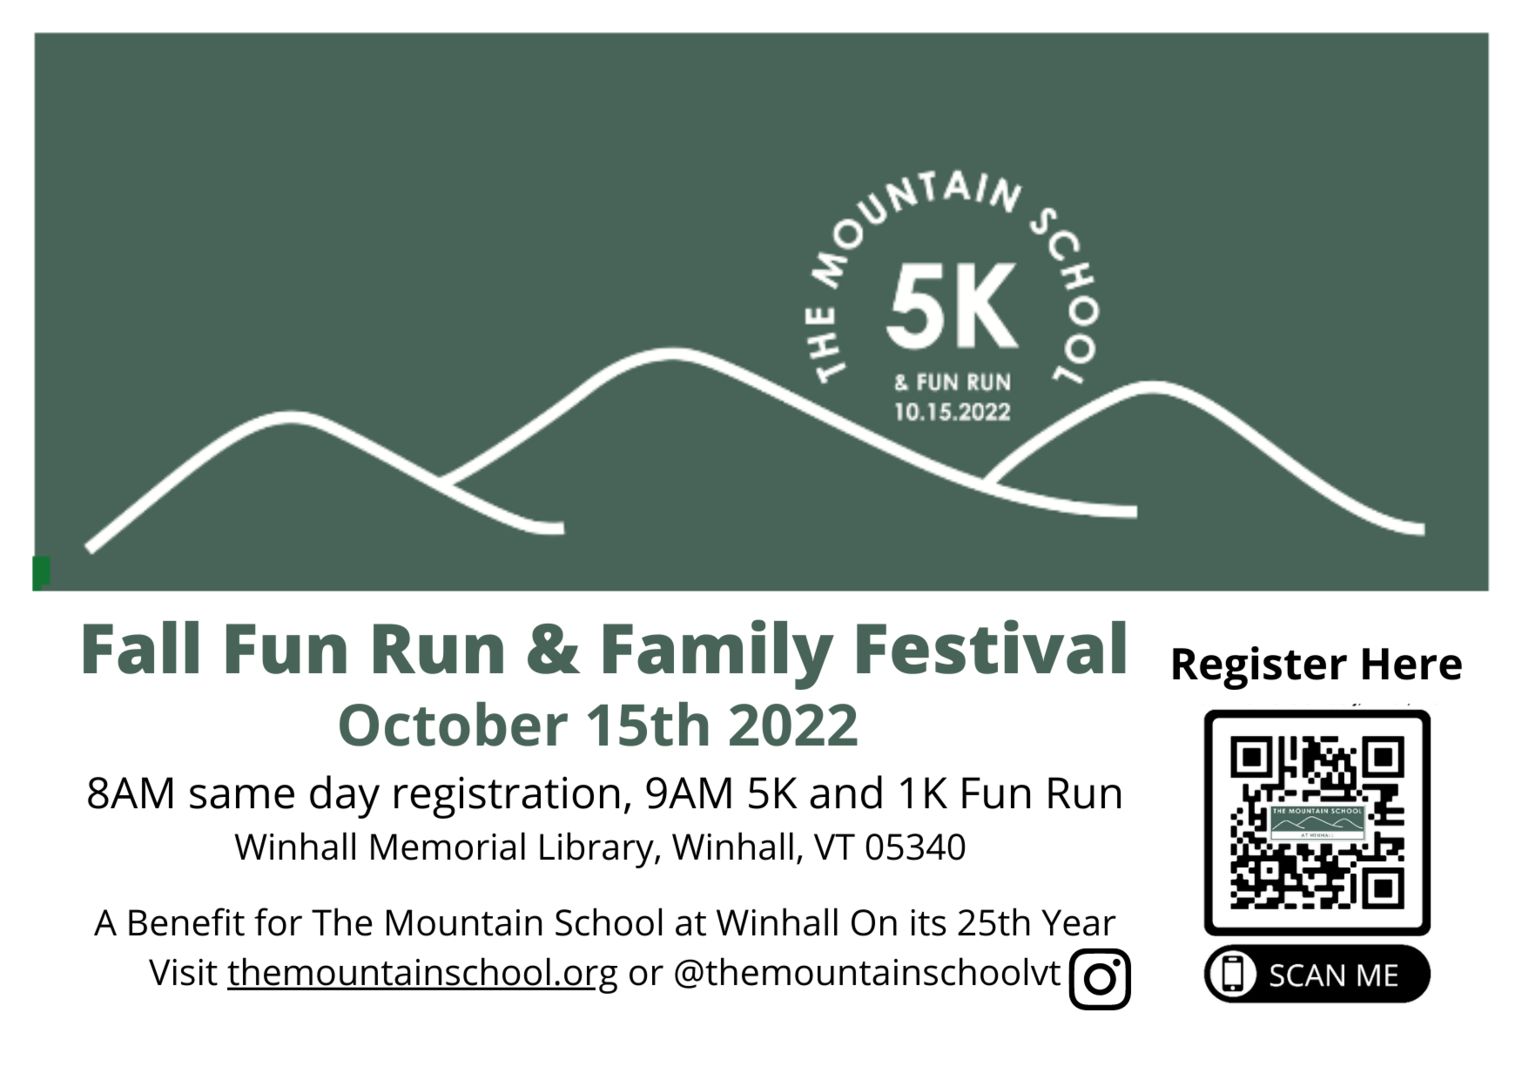 Family Fun Run & Festival to Benefit The Mountain School at Winhall, Winhall, Vermont, United States